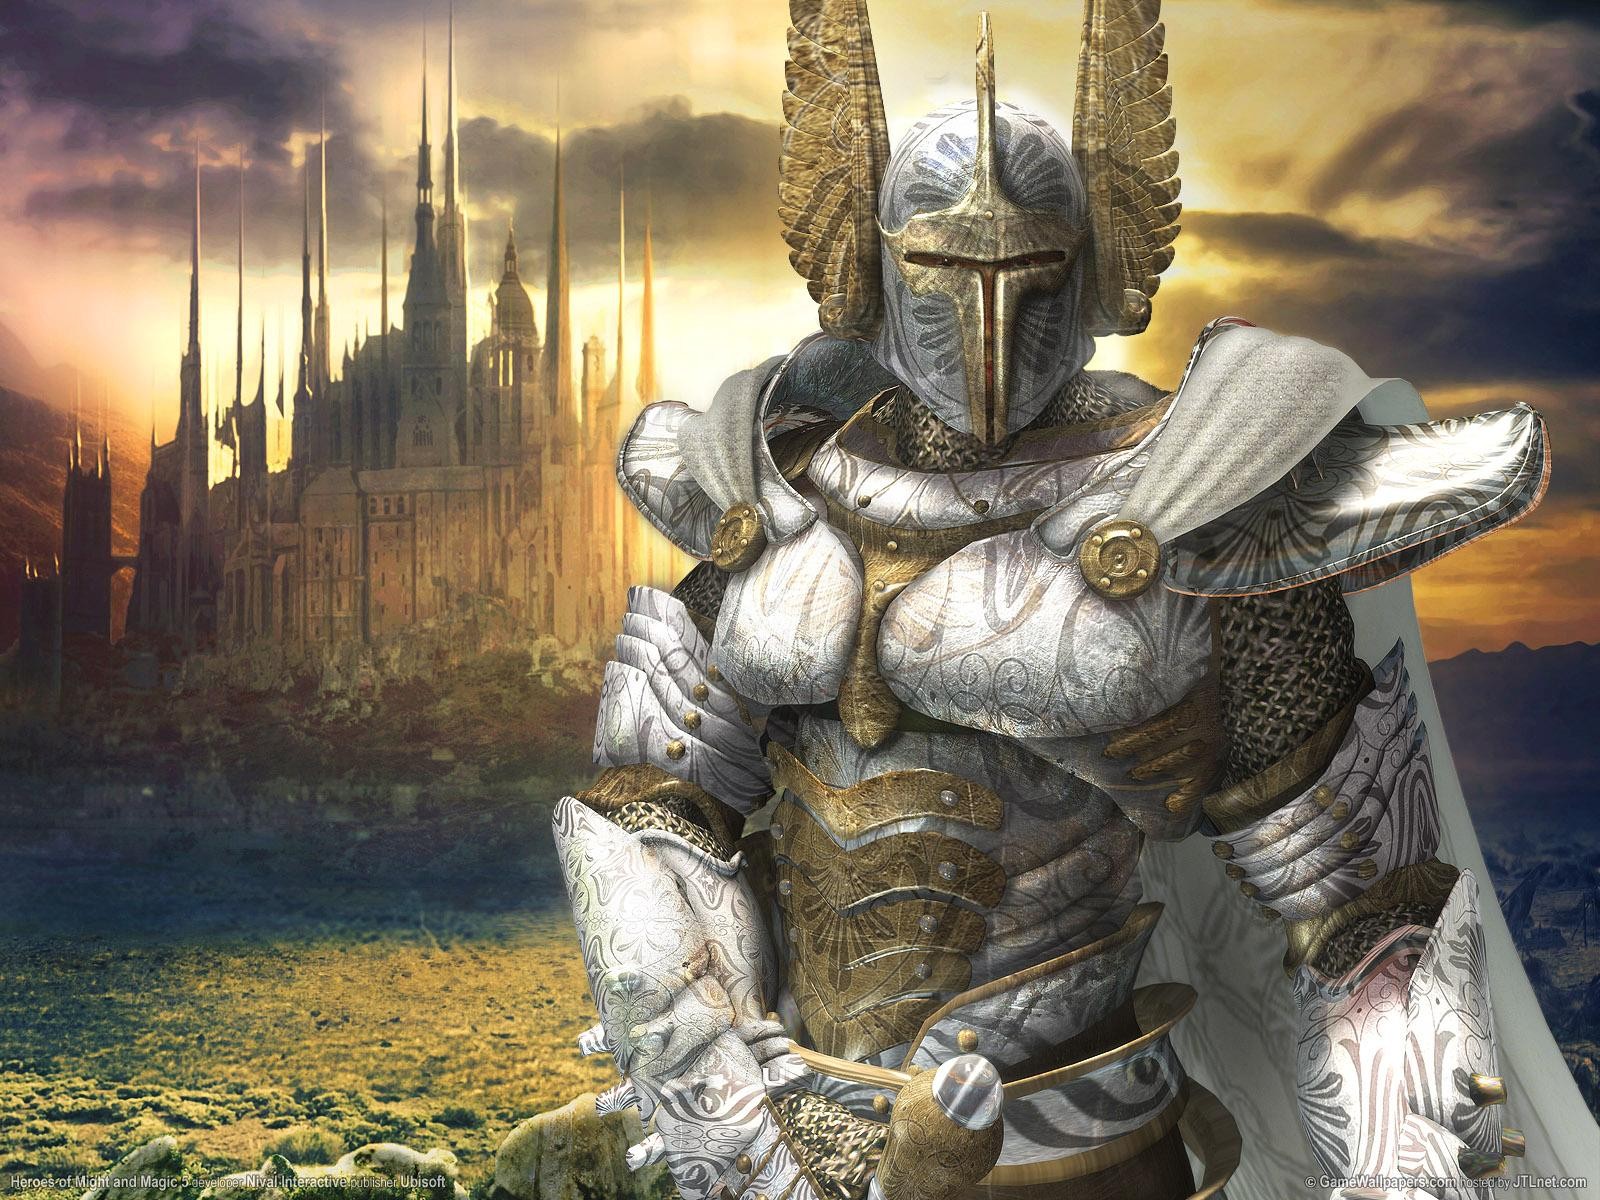 General 1600x1200 Heroes of Might And Magic 5 Heroes of Might and Magic Might And Magic video games PC gaming fantasy art fantasy armor